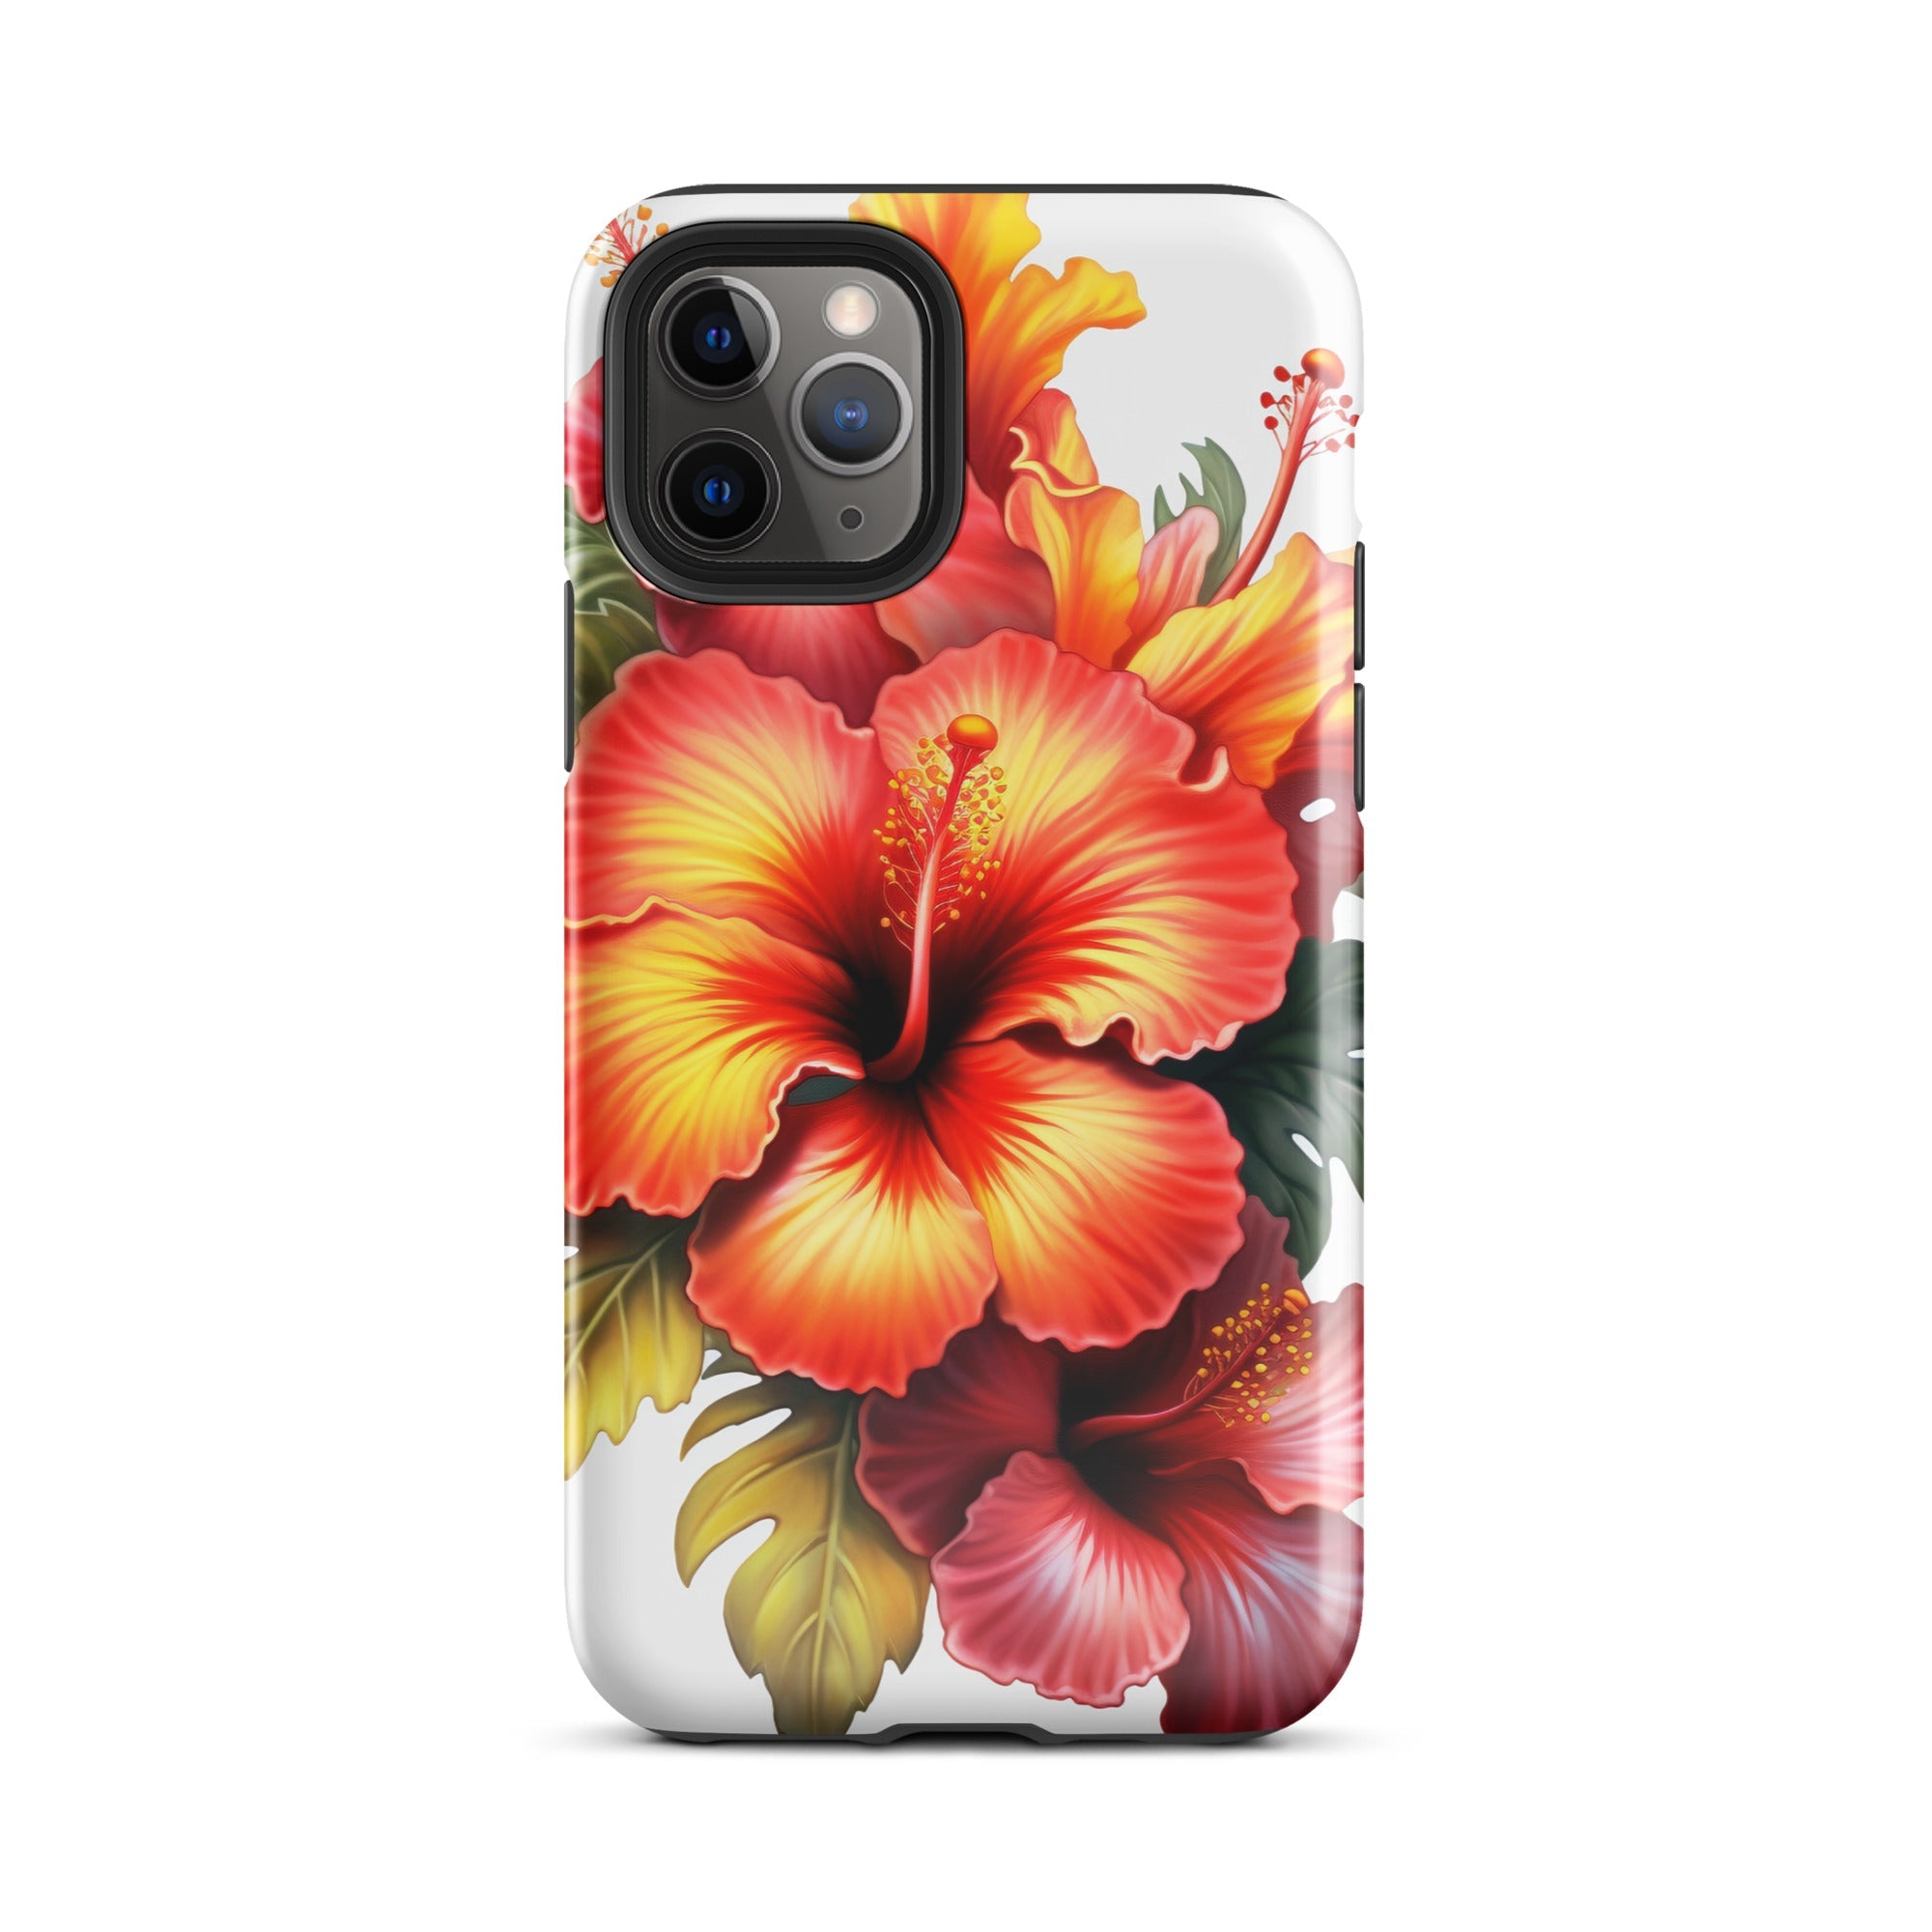 Hibiscus Flower iPhone Case by Visual Verse - Image 3